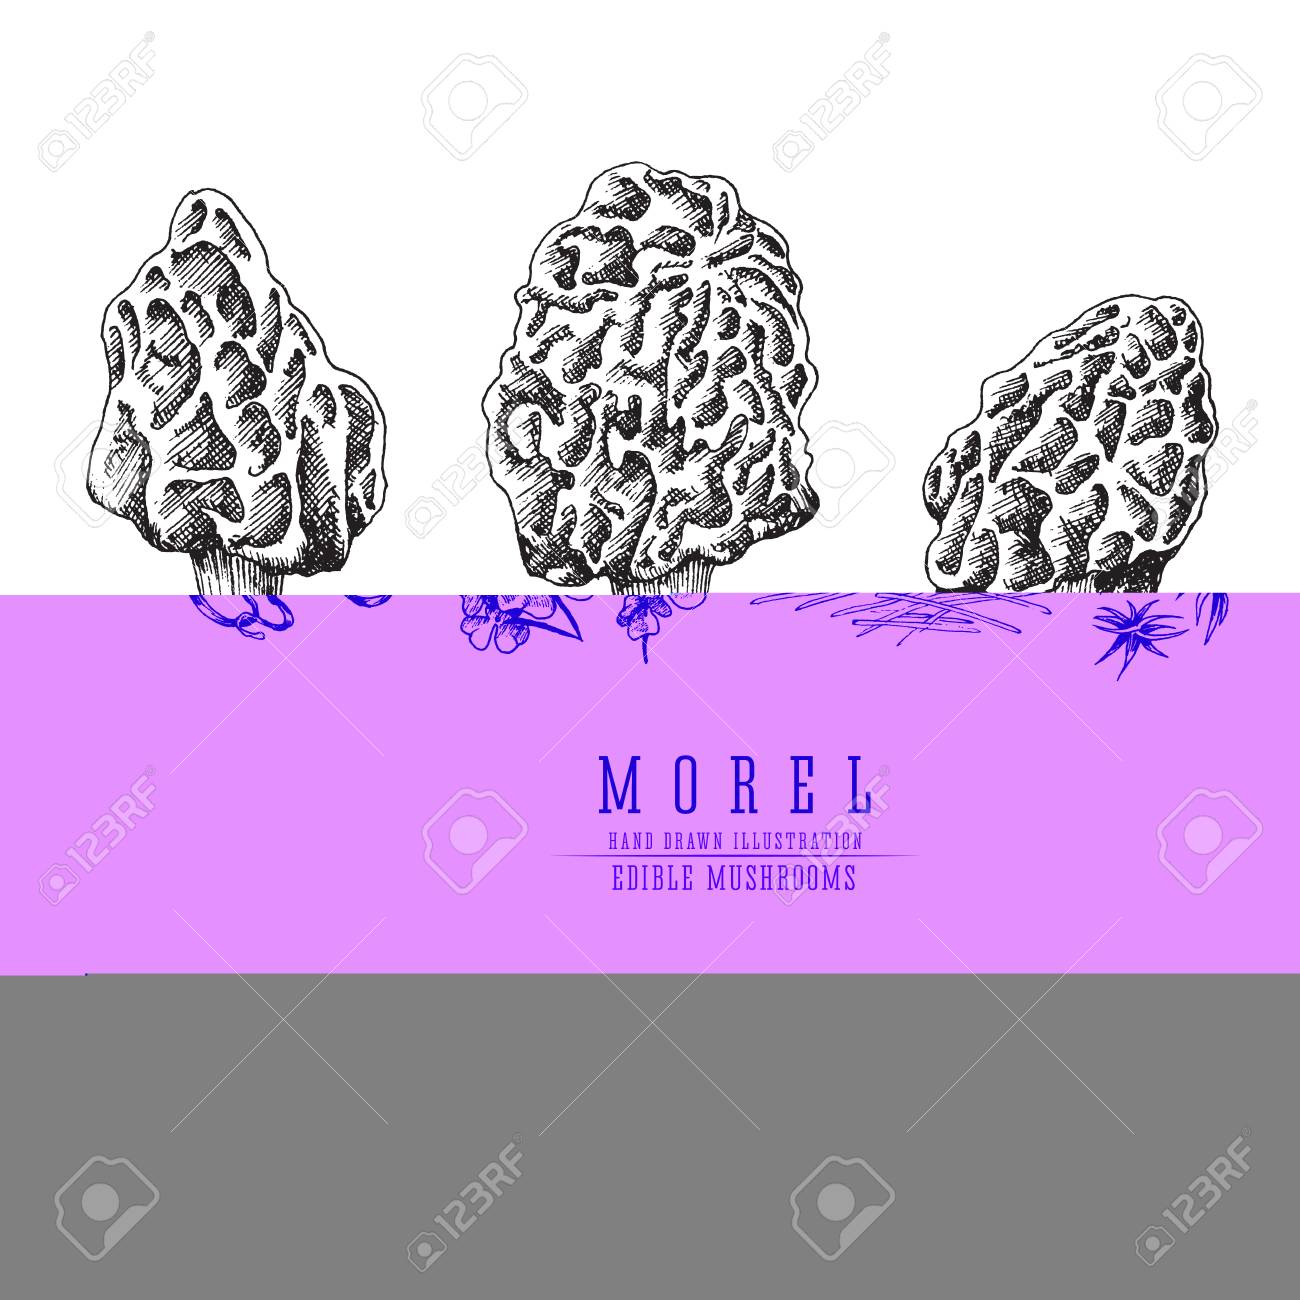 Morel Mushrooms Vector Sketch Collection Edible Mushroom Isolated